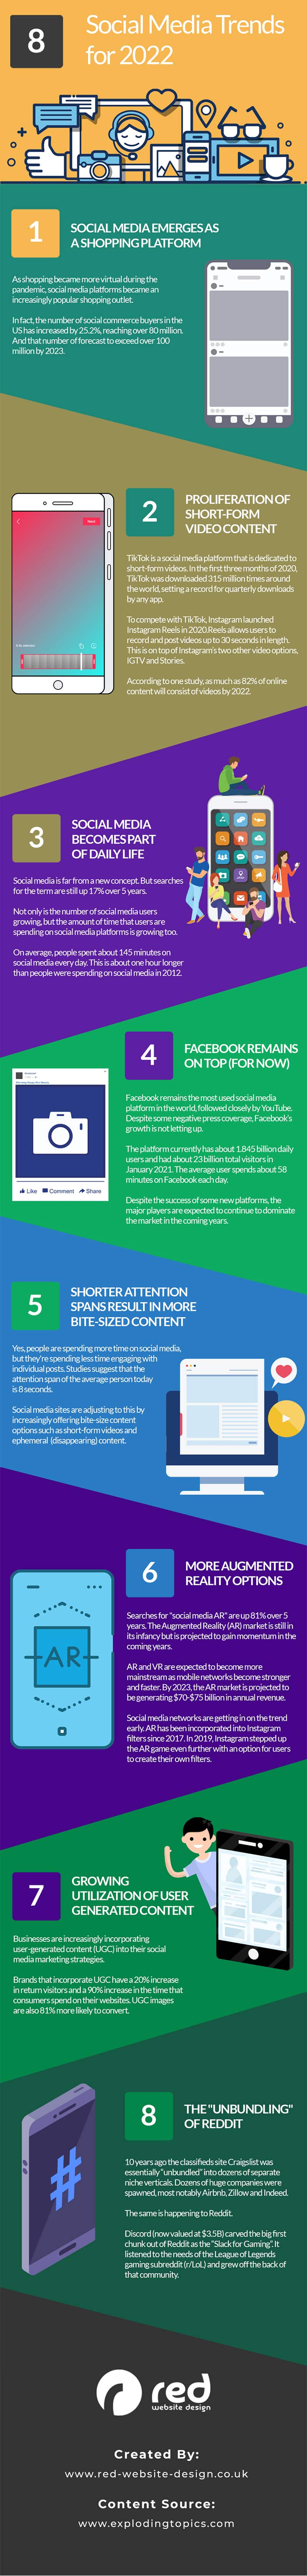 8 Social Media Marketing Trends & Predictions for 2022 & Beyond [Infographic]